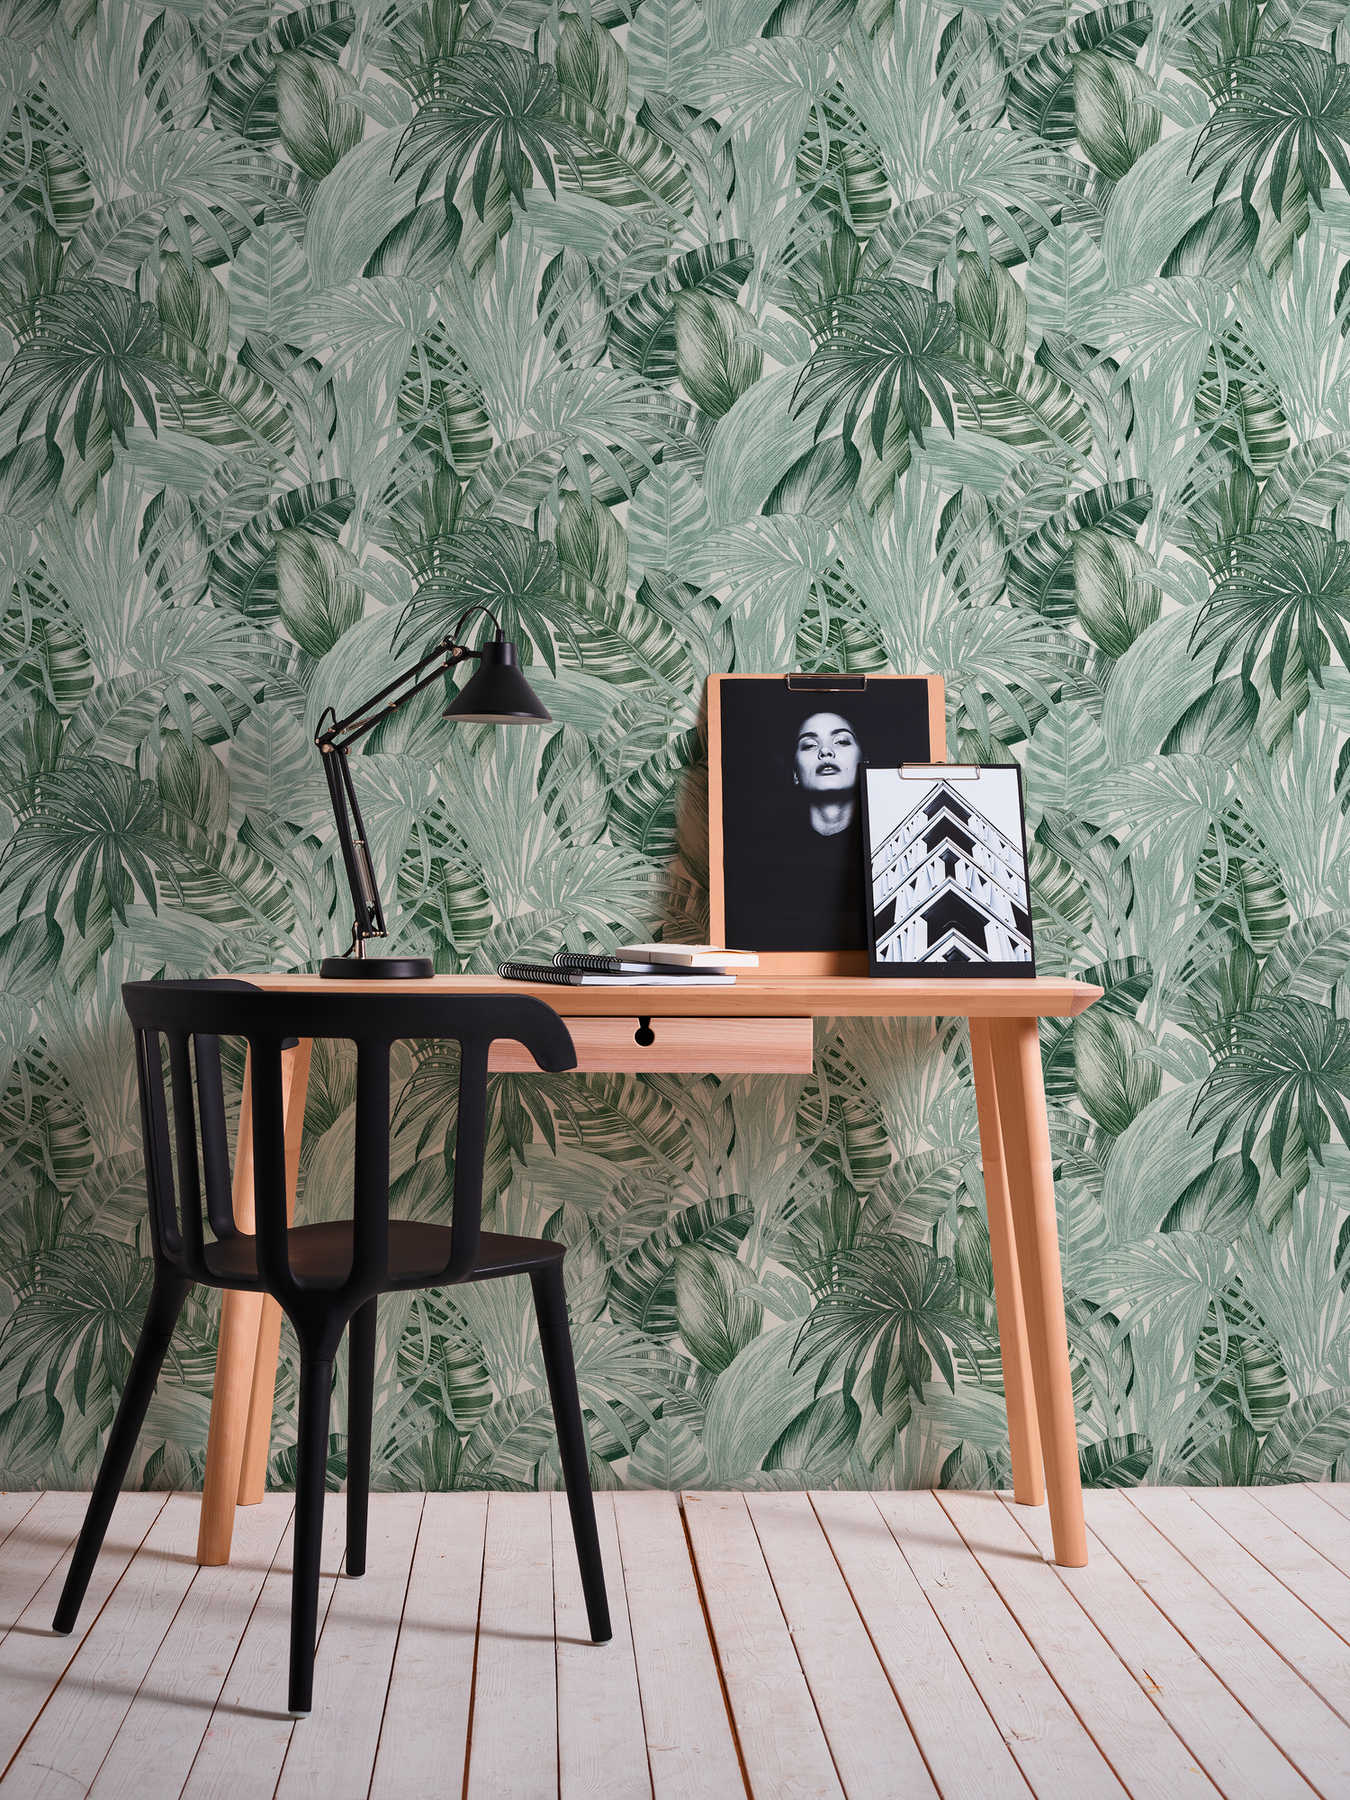             Pattern wallpaper with leaf motif in drawing style - green, white
        